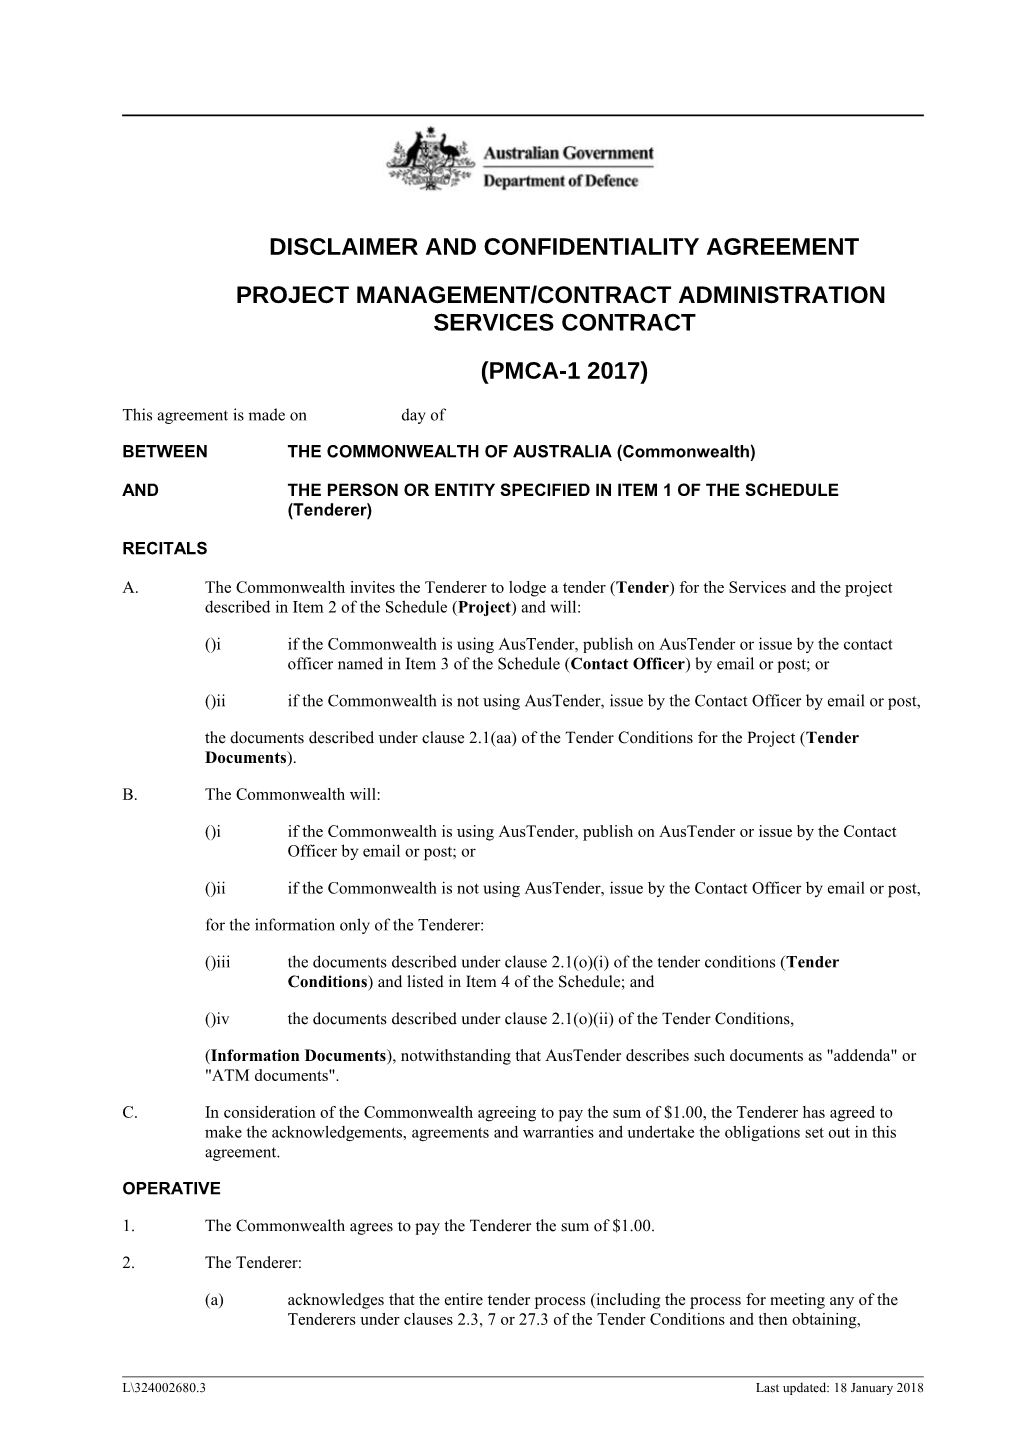 Disclaimer and Confidentiality Agreement